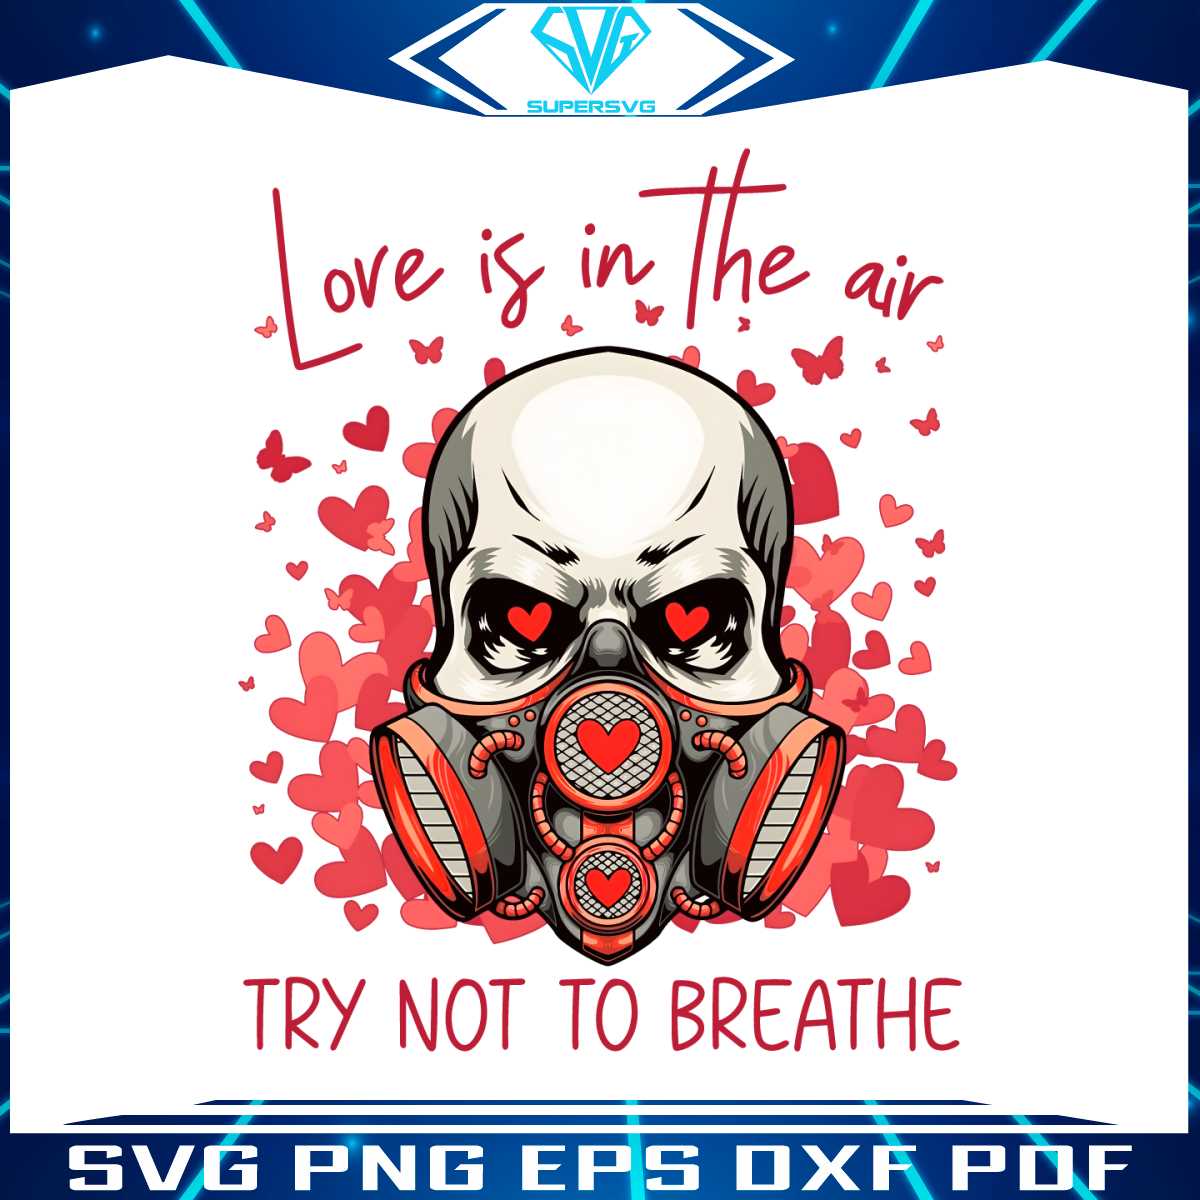 love-is-in-the-air-gas-mask-skull-png